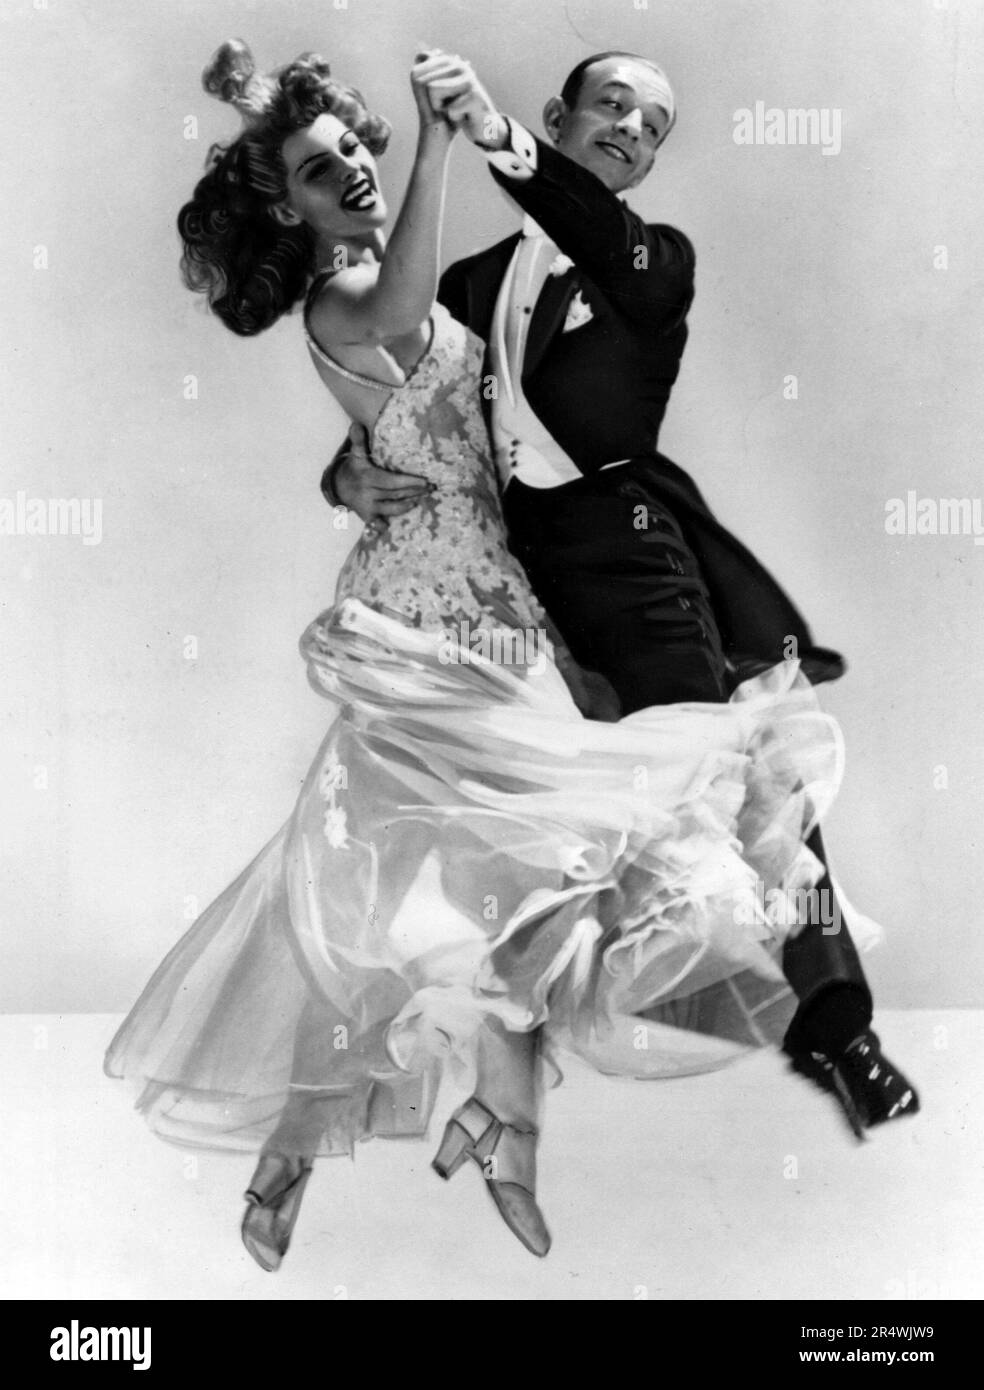 Film still from 'You'll Never Get Rich' staring Rita Hayworth (1918-1987) and Fred Astaire (1899-1987). Dated 1941 Stock Photo